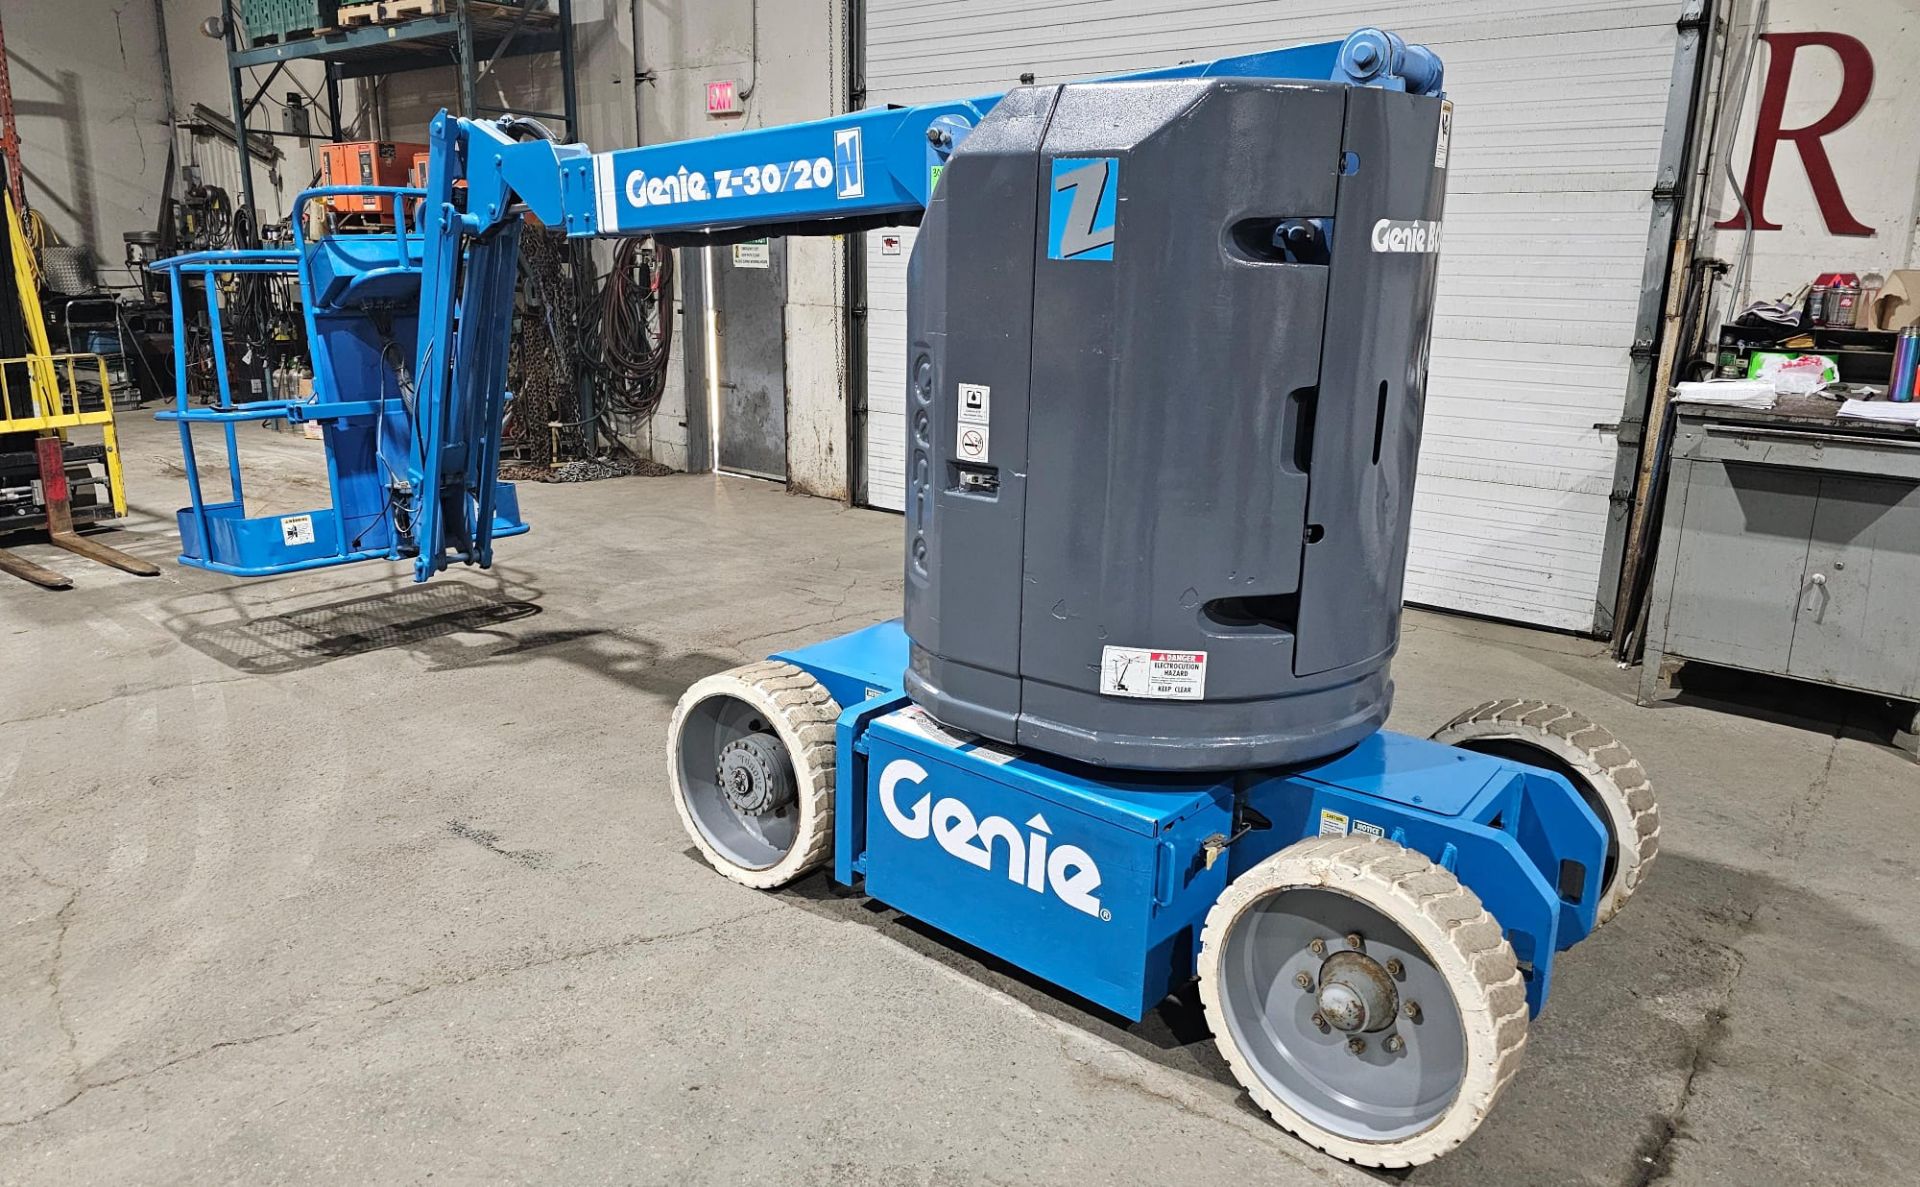 Genie model Z-30/20N Zoom Boom Electric Motorized Man Lift 30' Height & 21' Reach - with 24V Battery - Image 2 of 10